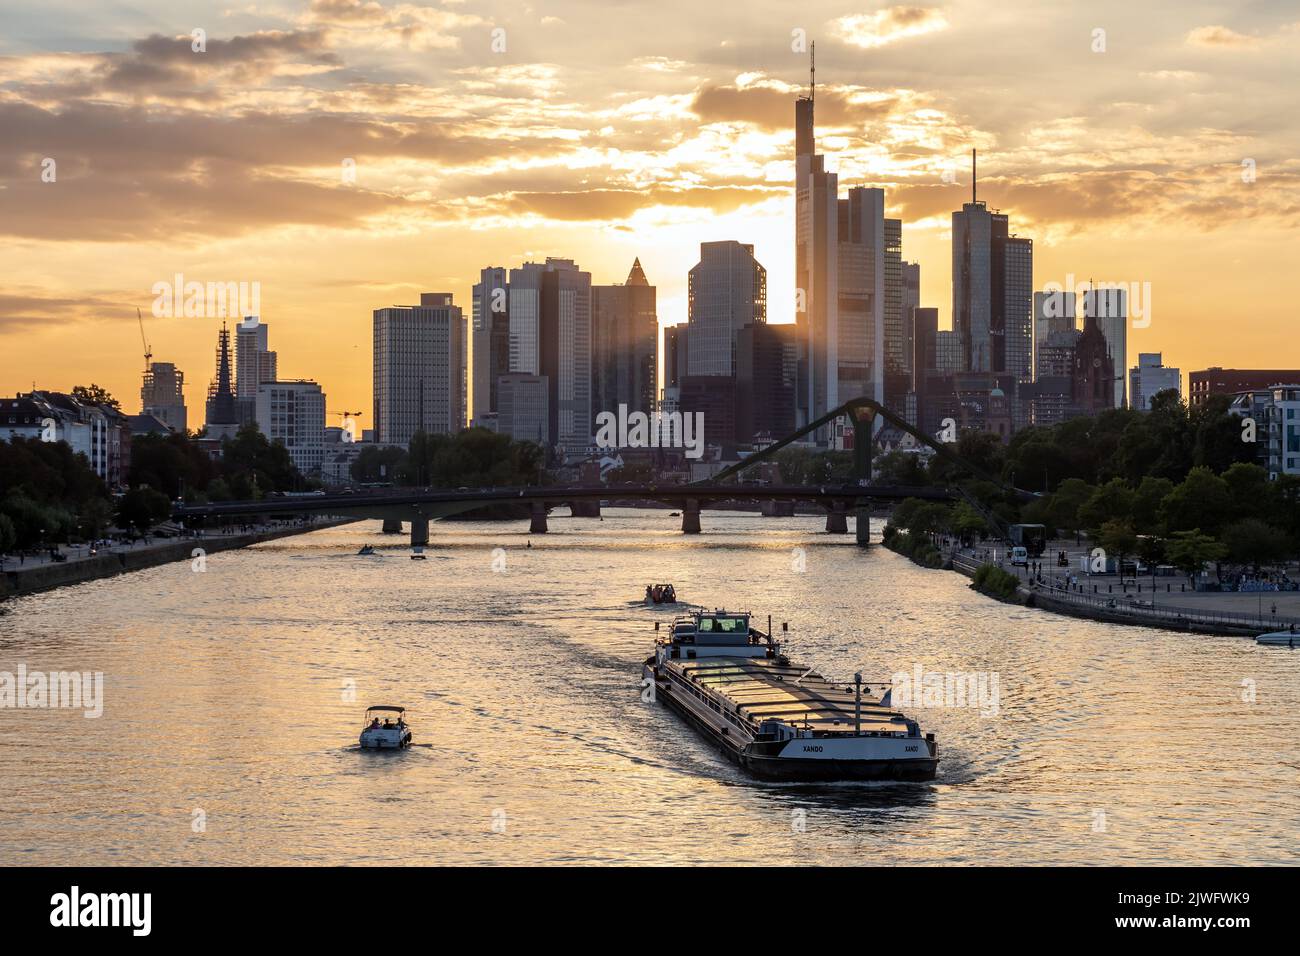 Barge on the Main River against the backdrop of the Frankfurt skyline Stock Photo